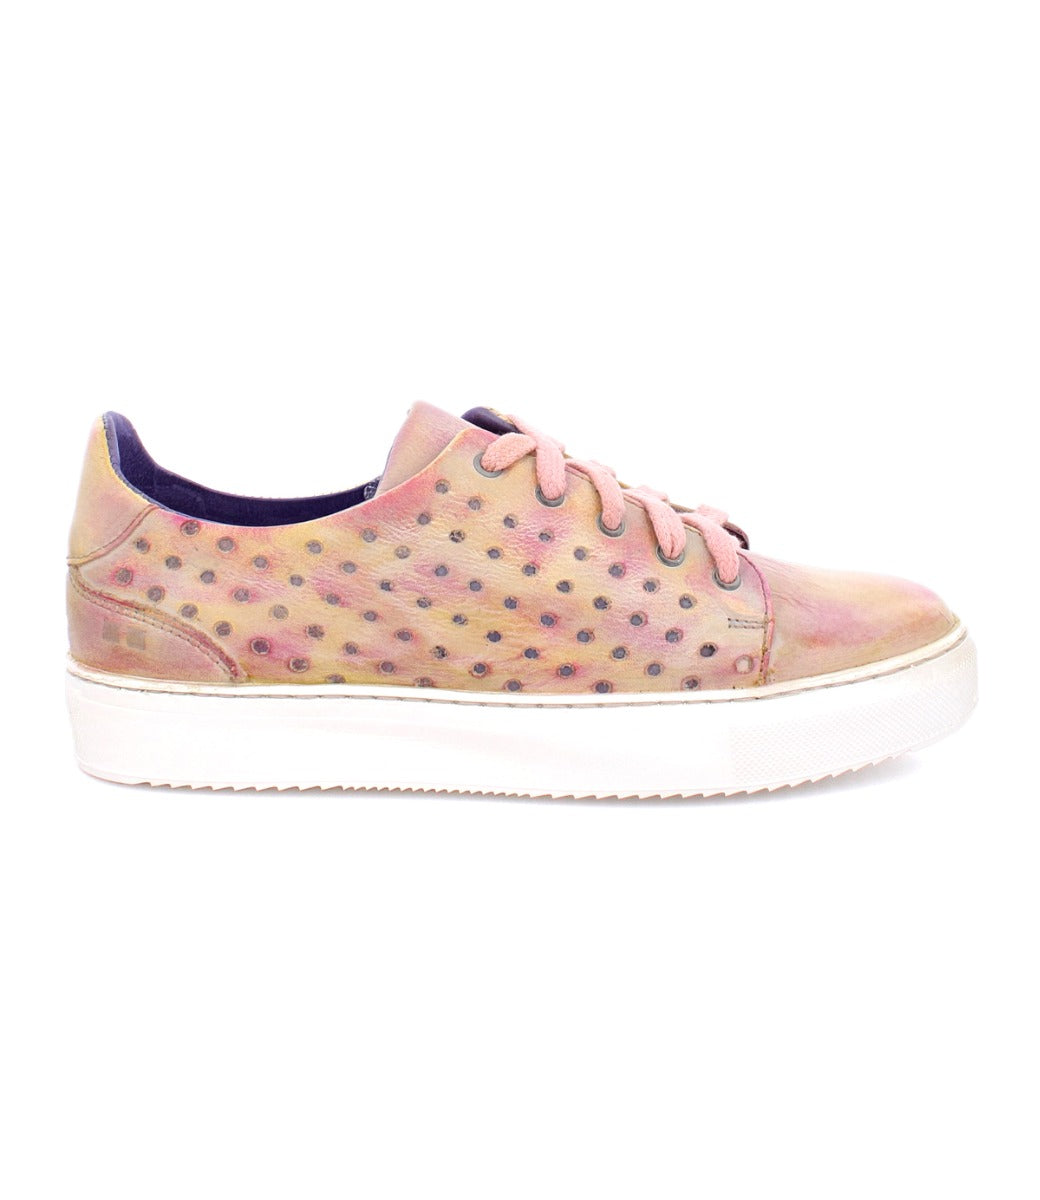 A women's pink leather sneaker with polka dots called the Lyne by Bed Stu.